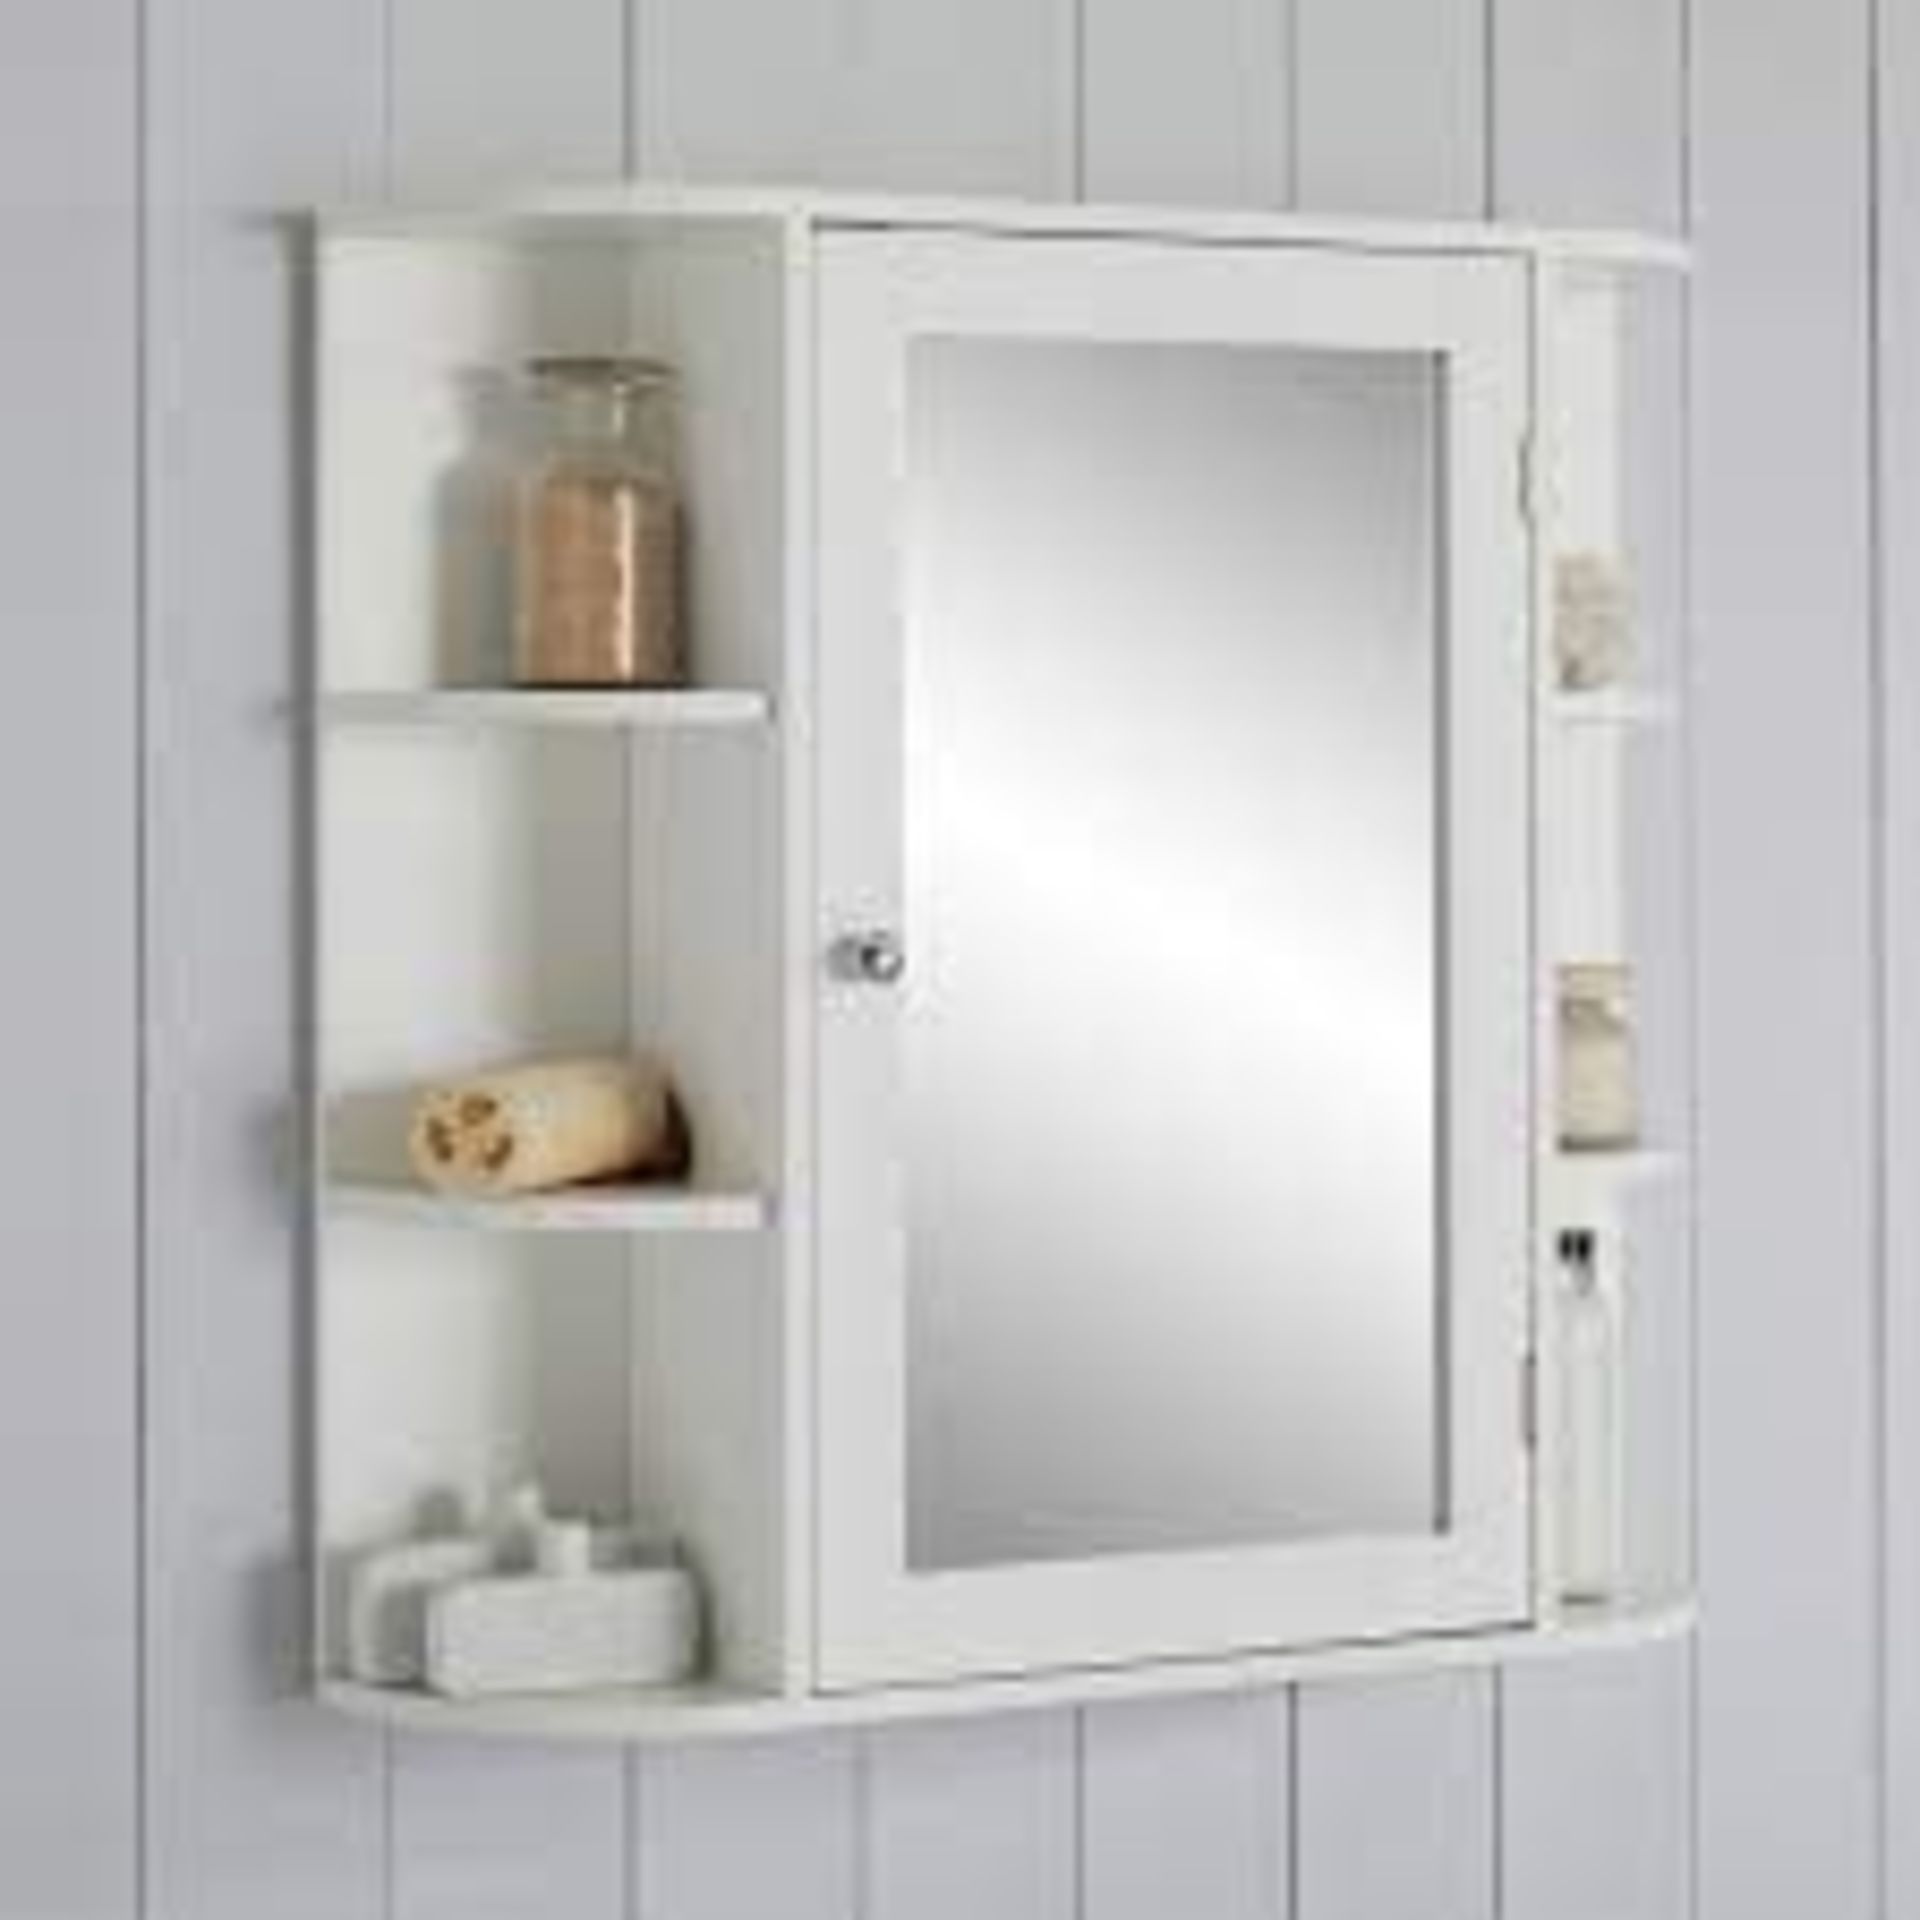 Coughton White Bathroom Mirrored Storage Cabinet. - SR3. The Coughton Mirror Cabinet with Side